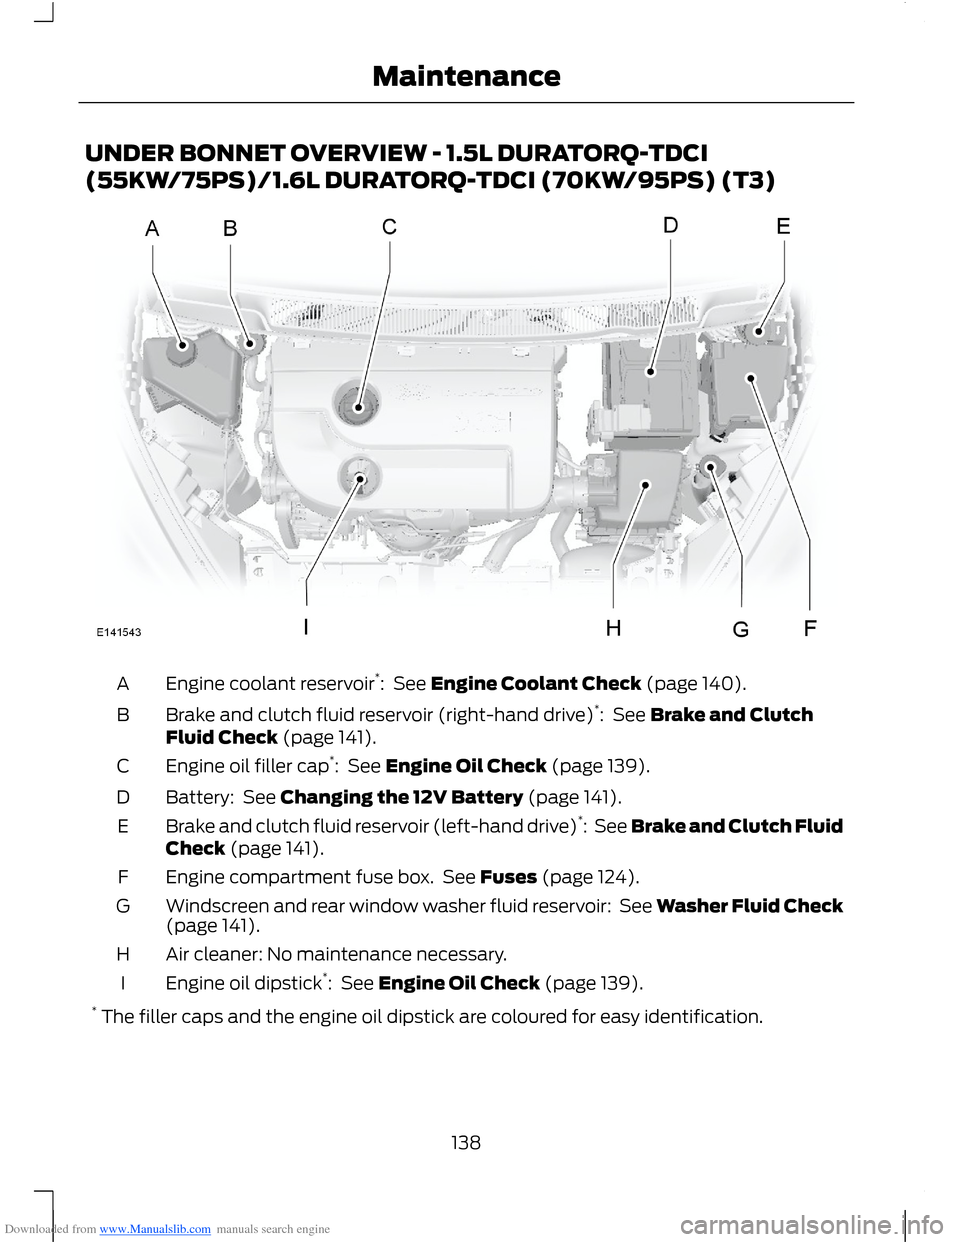 FORD B MAX 2012 1.G Owners Manual Downloaded from www.Manualslib.com manuals search engine UNDER BONNET OVERVIEW - 1.5L DURATORQ-TDCI
(55KW/75PS)/1.6L DURATORQ-TDCI (70KW/95PS) (T3)
Engine coolant reservoir*:  See Engine Coolant Check